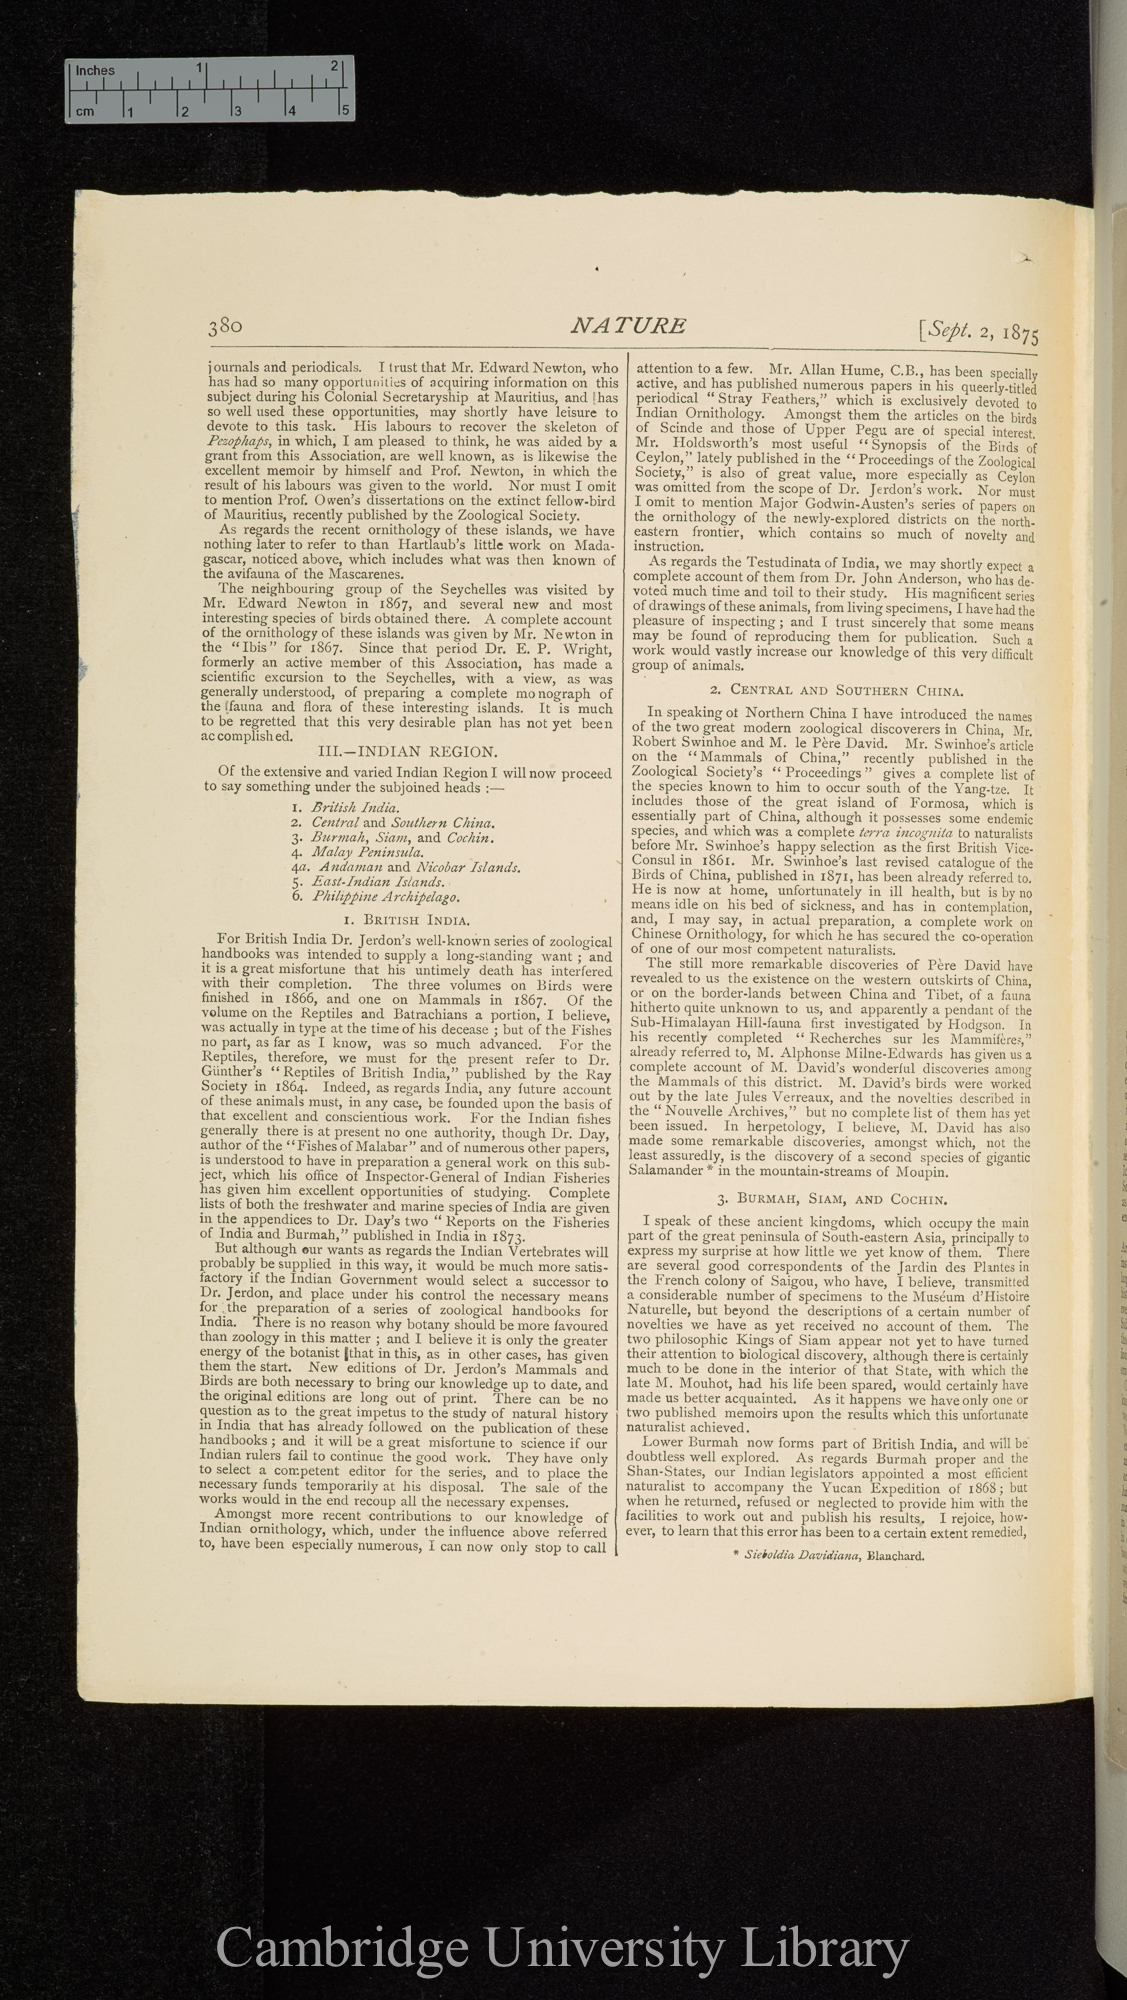 Address 25 August 1875 delivered to the biological section of the British Association: On the present state of our knowledge of geographical zoology &#39;Nature&#39; 12: 380